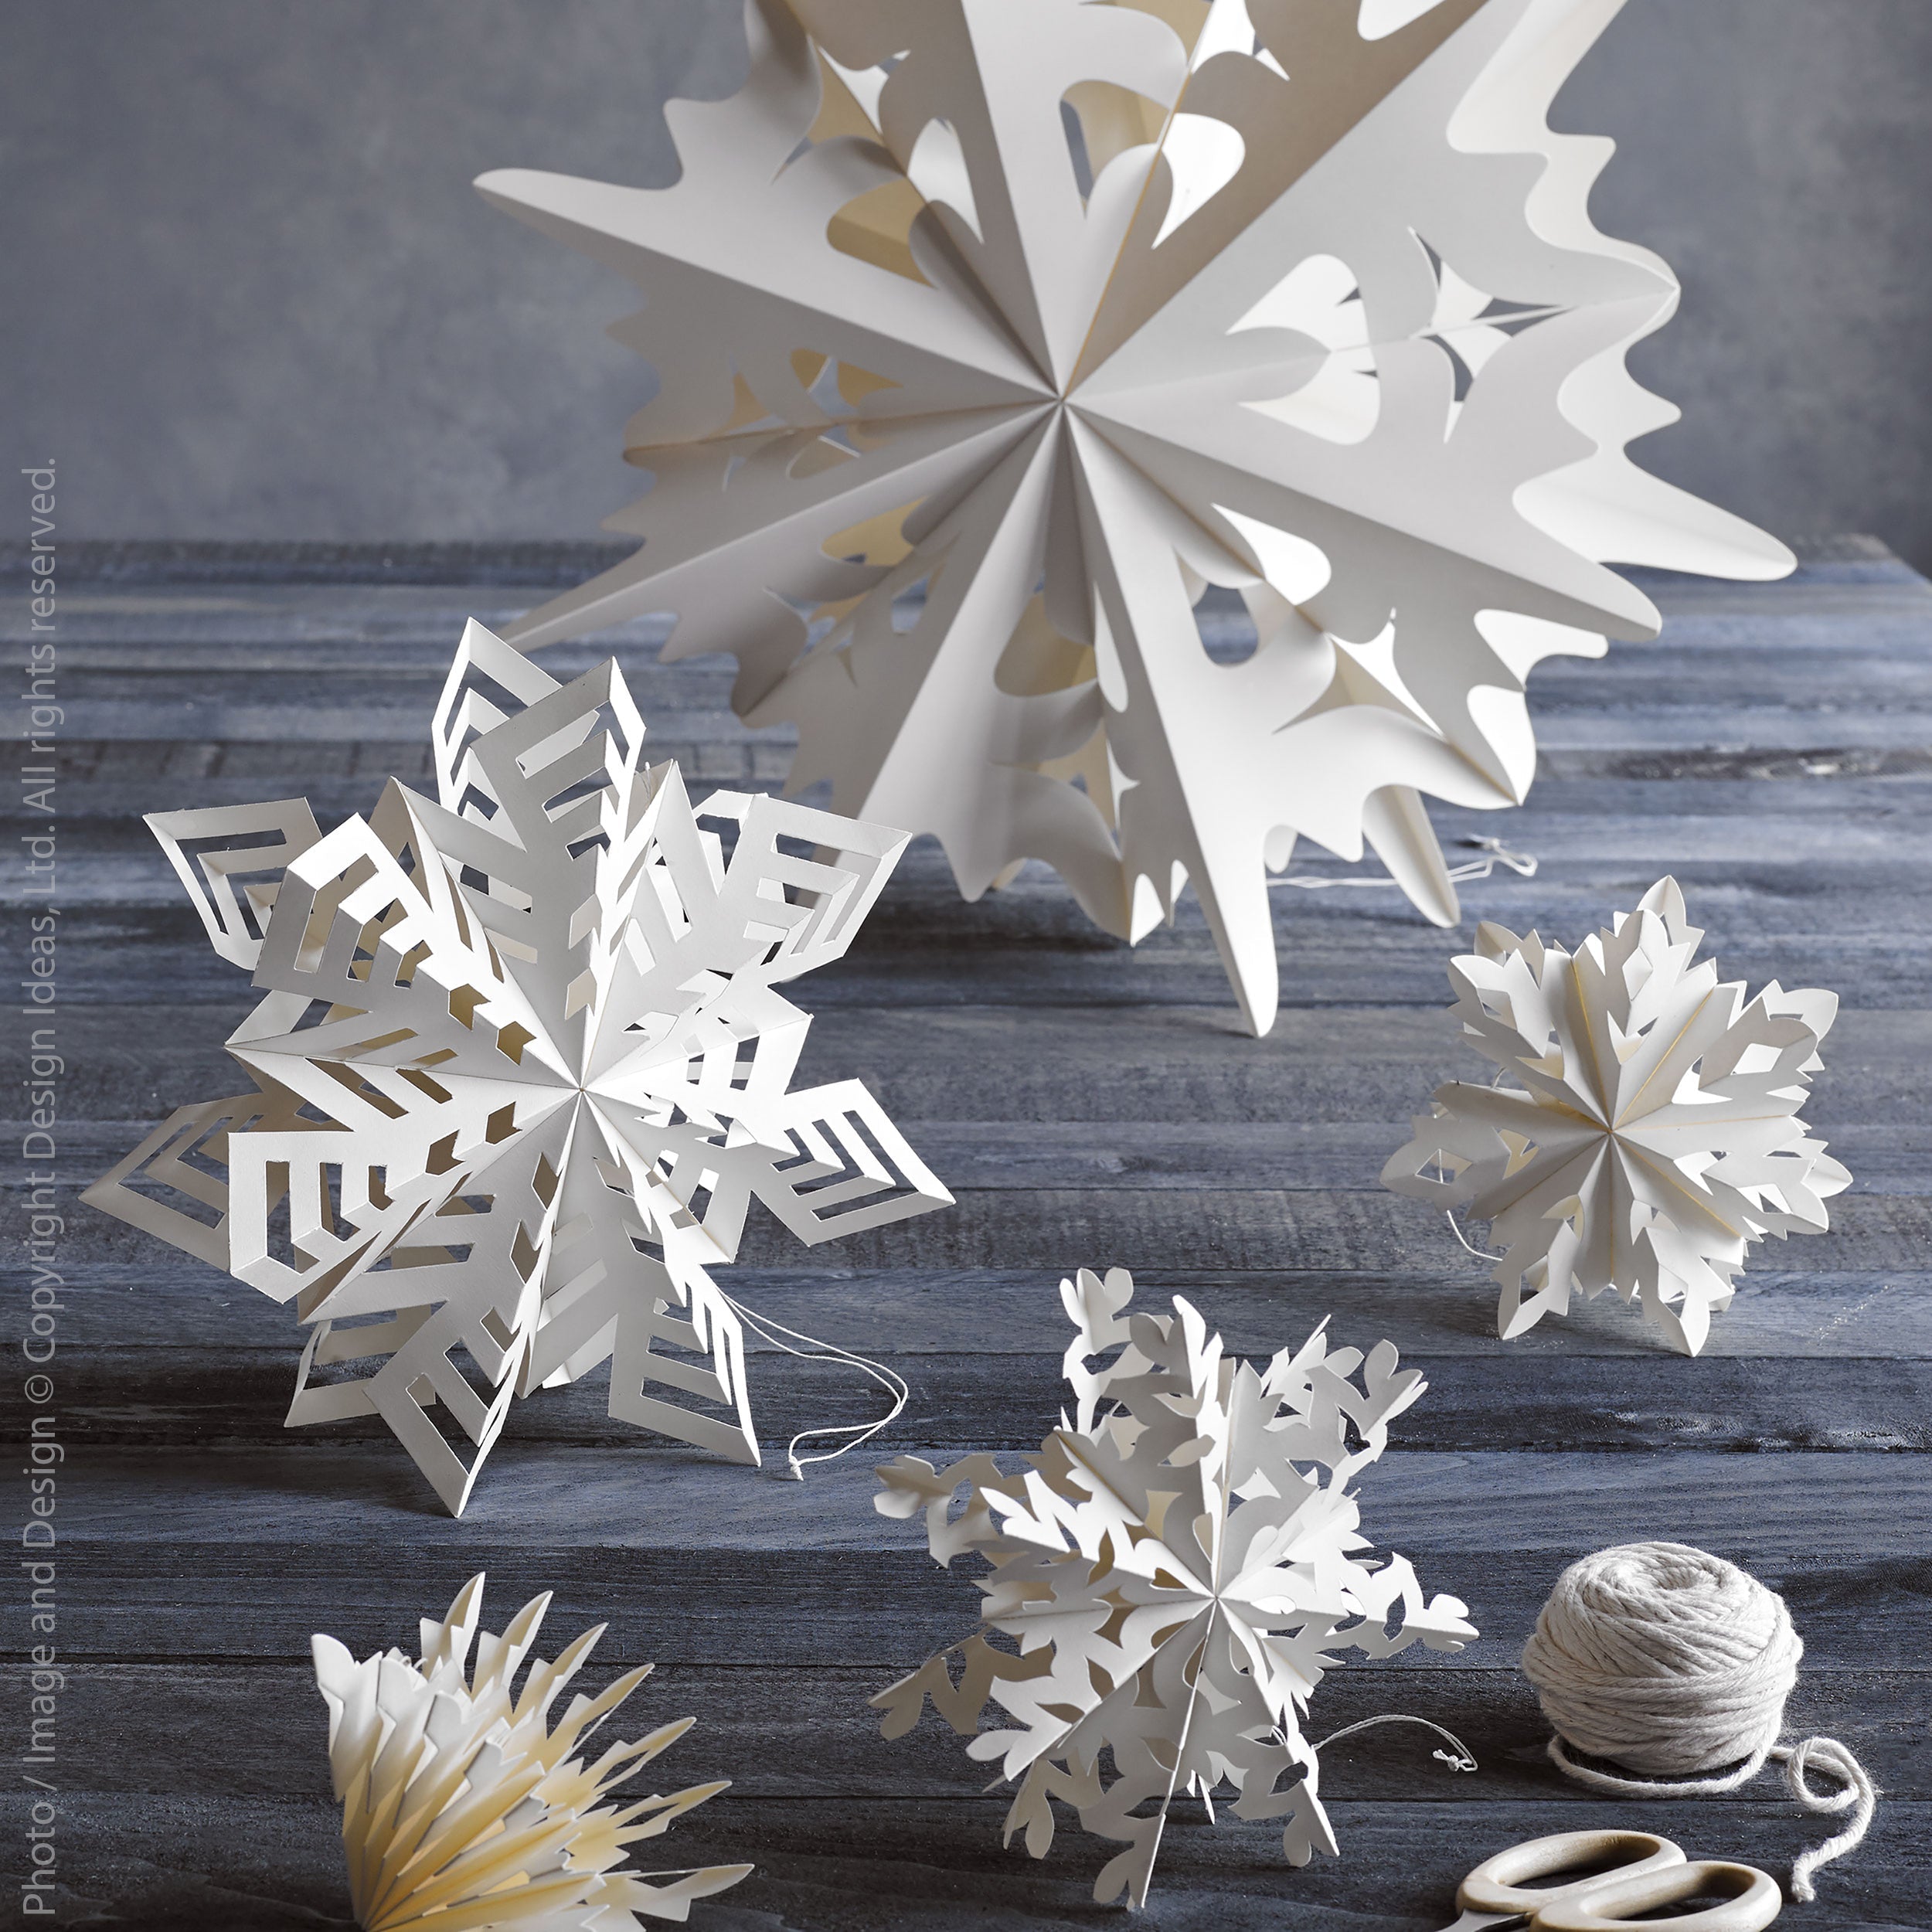 Flurry Paper Snowflake Tinsel (Small) White Color | Image 2 | From the Flurry Collection | Masterfully assembled with natural paper for long lasting use | Available in natural color | texxture home